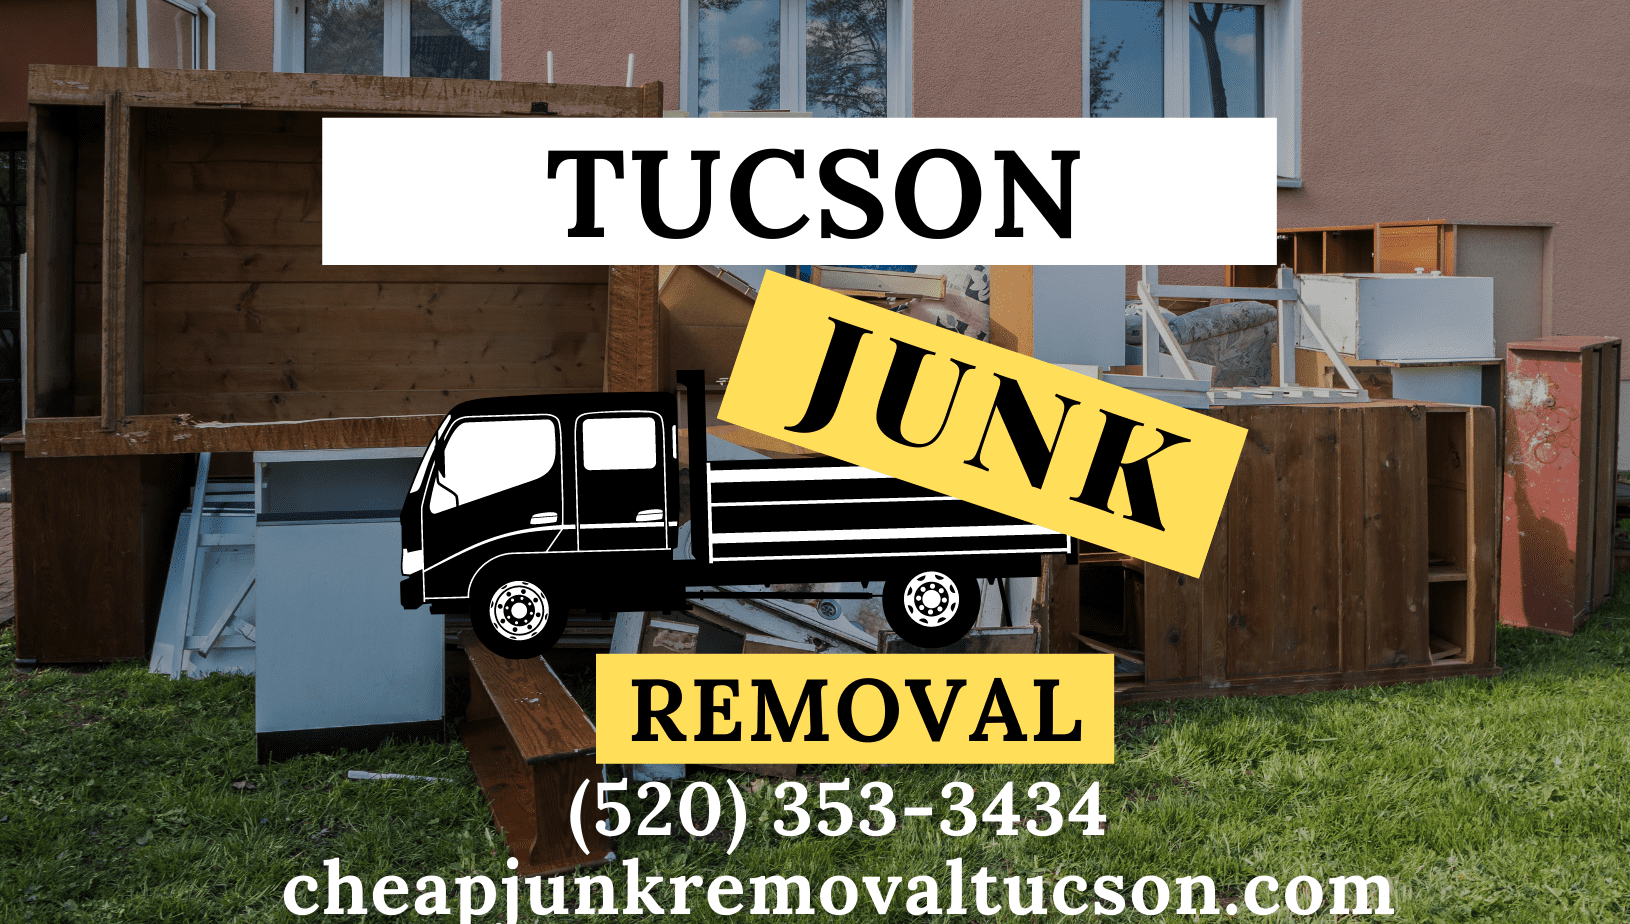 Tucson Junk Removal